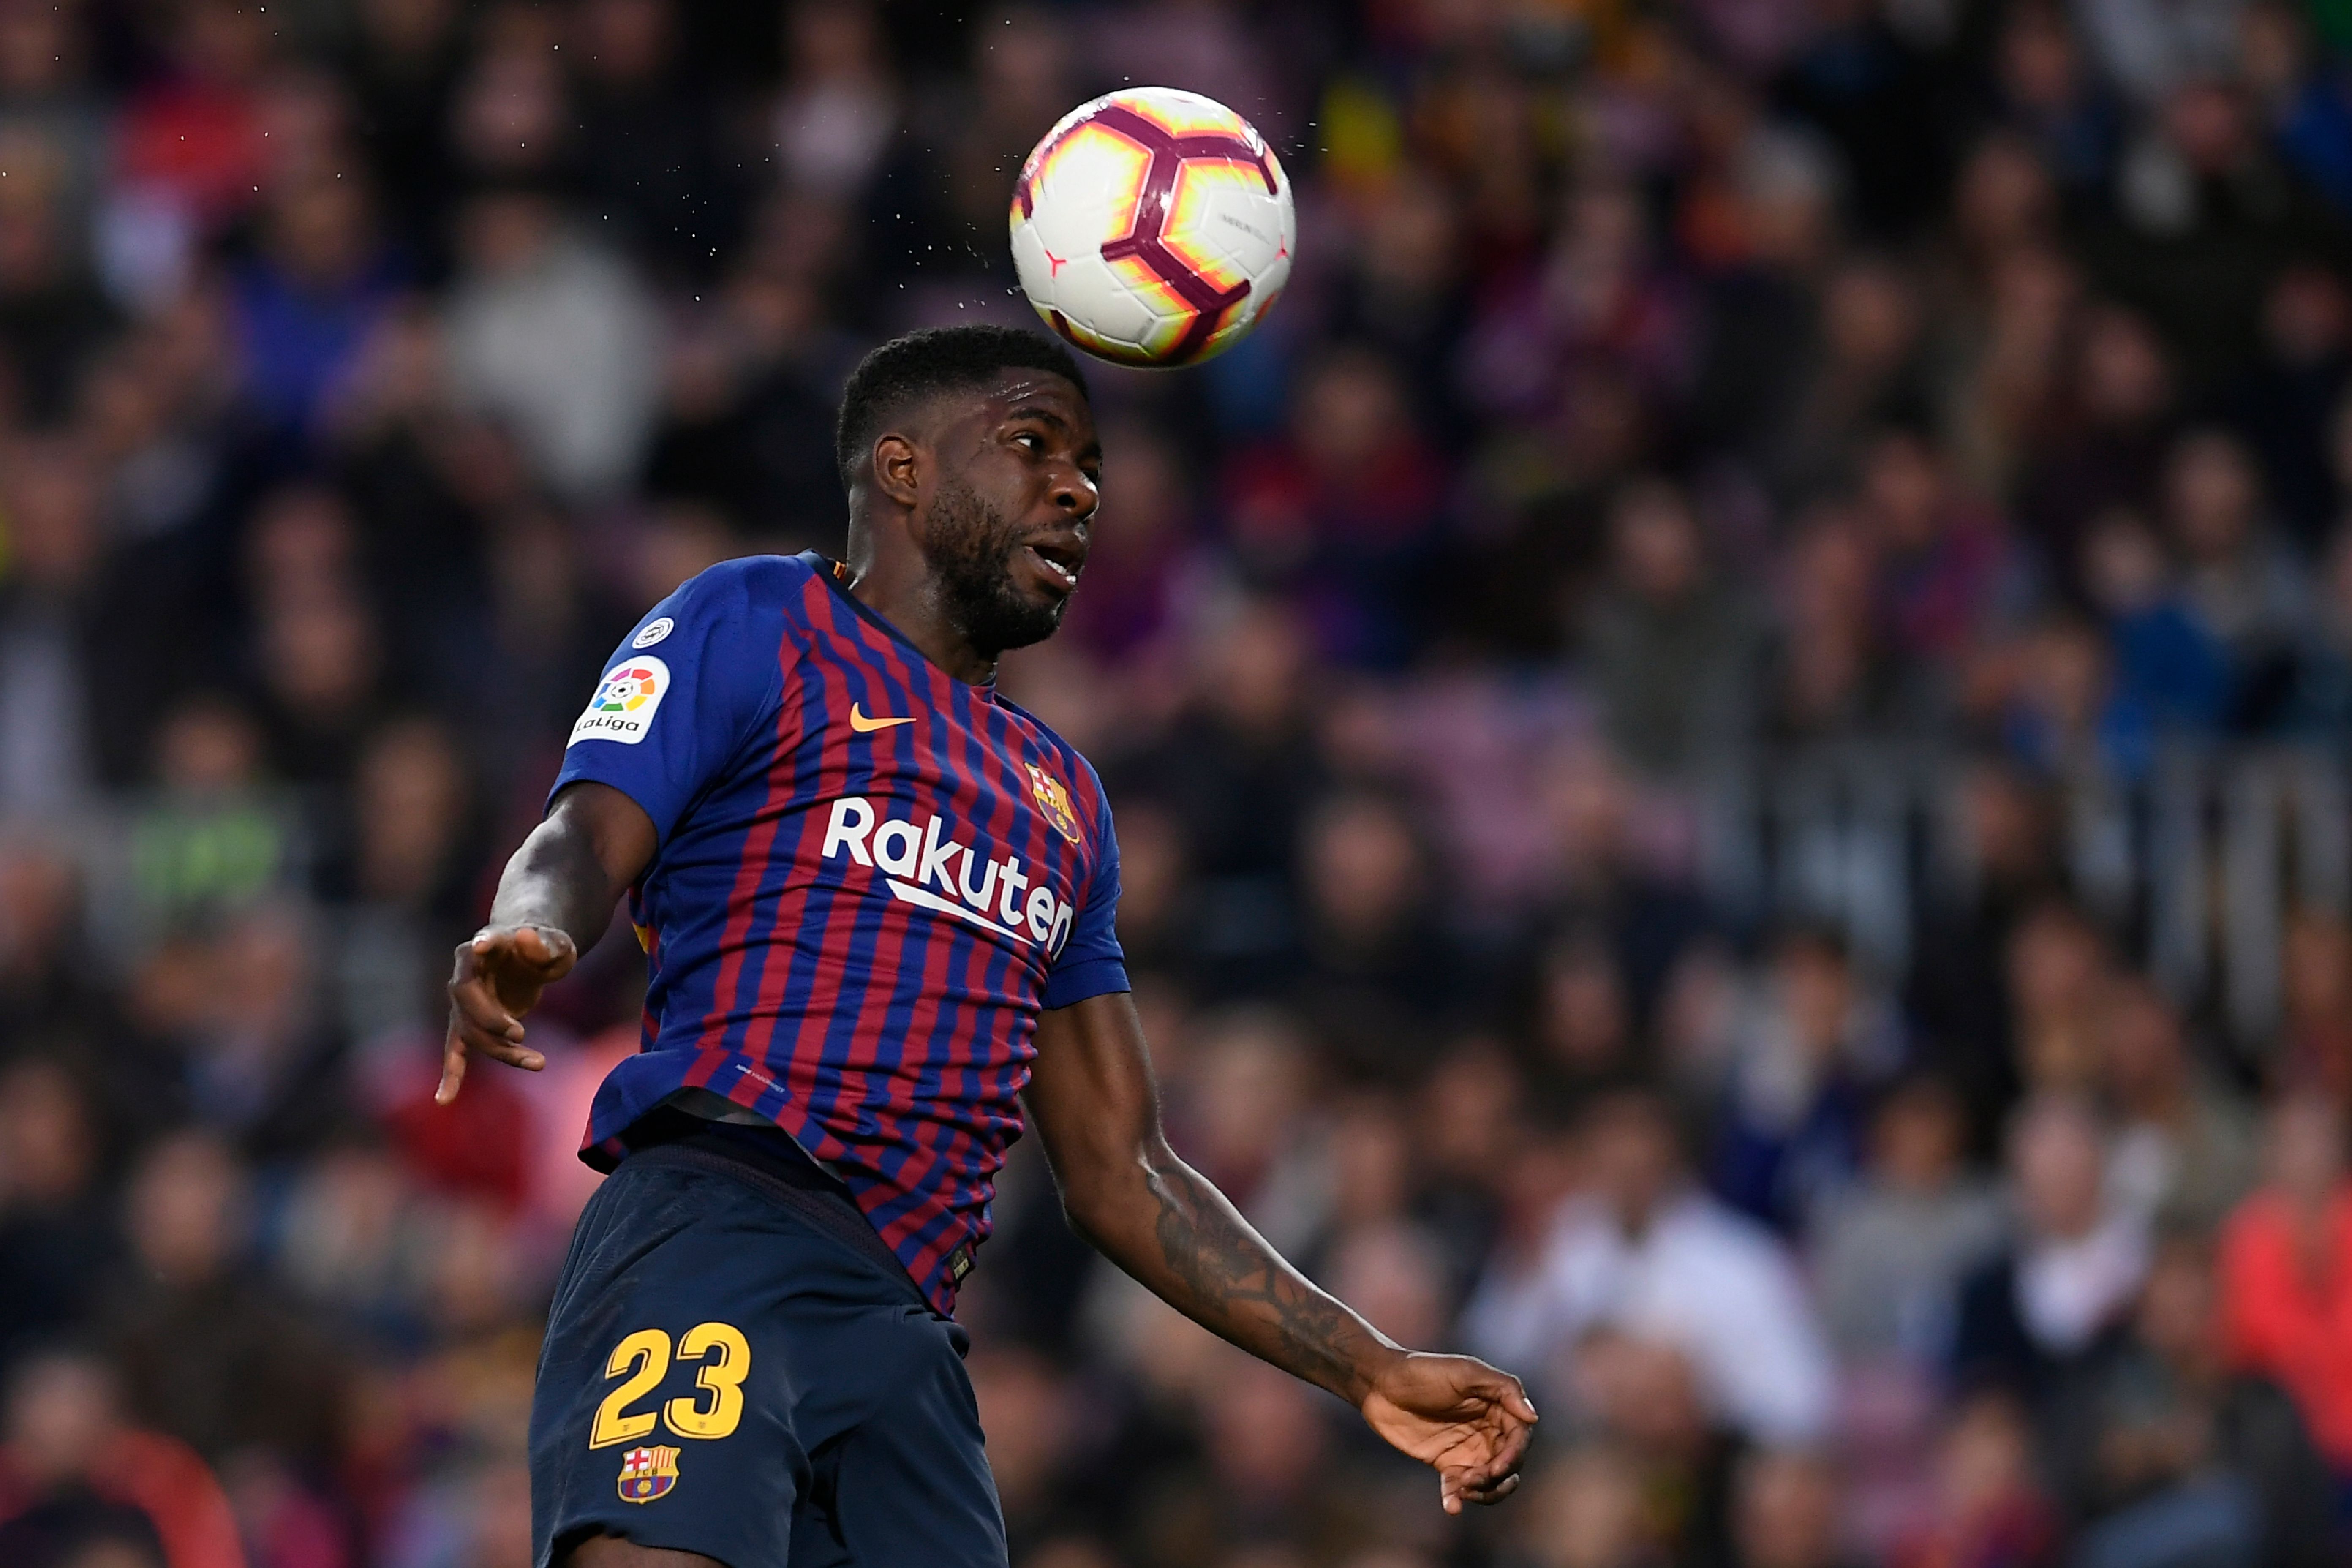 Barcelona's French defender Samuel Umtiti jumps for the ball during the Spanish league football match between FC Barcelona and Rayo Vallecano de Madrid at the Camp Nou stadium in Barcelona on March 9, 2019. (Photo by LLUIS GENE / AFP)        (Photo credit should read LLUIS GENE/AFP/Getty Images)